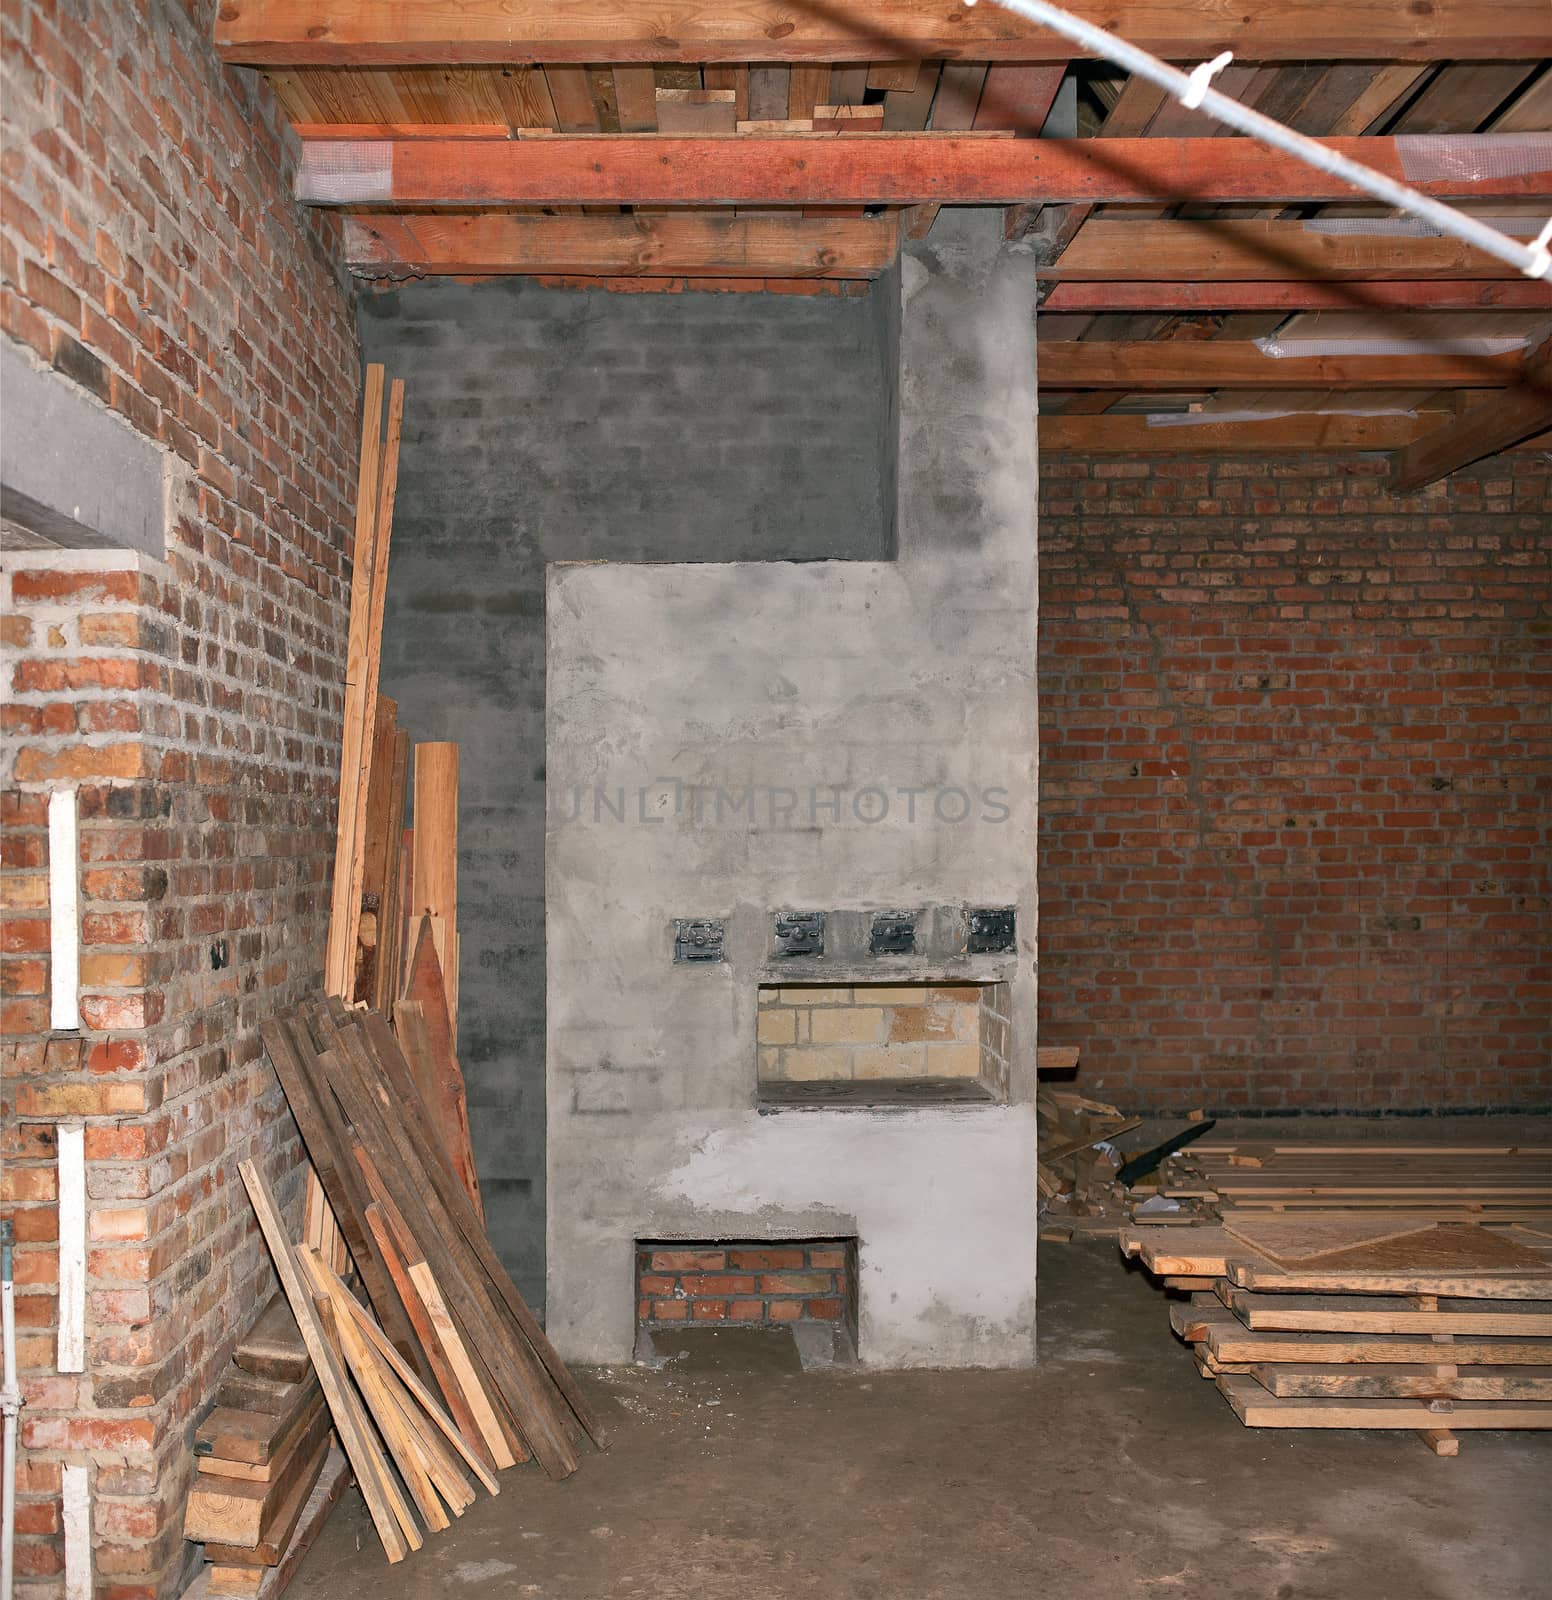 Construction of Russian oven in a building made ������of bricks